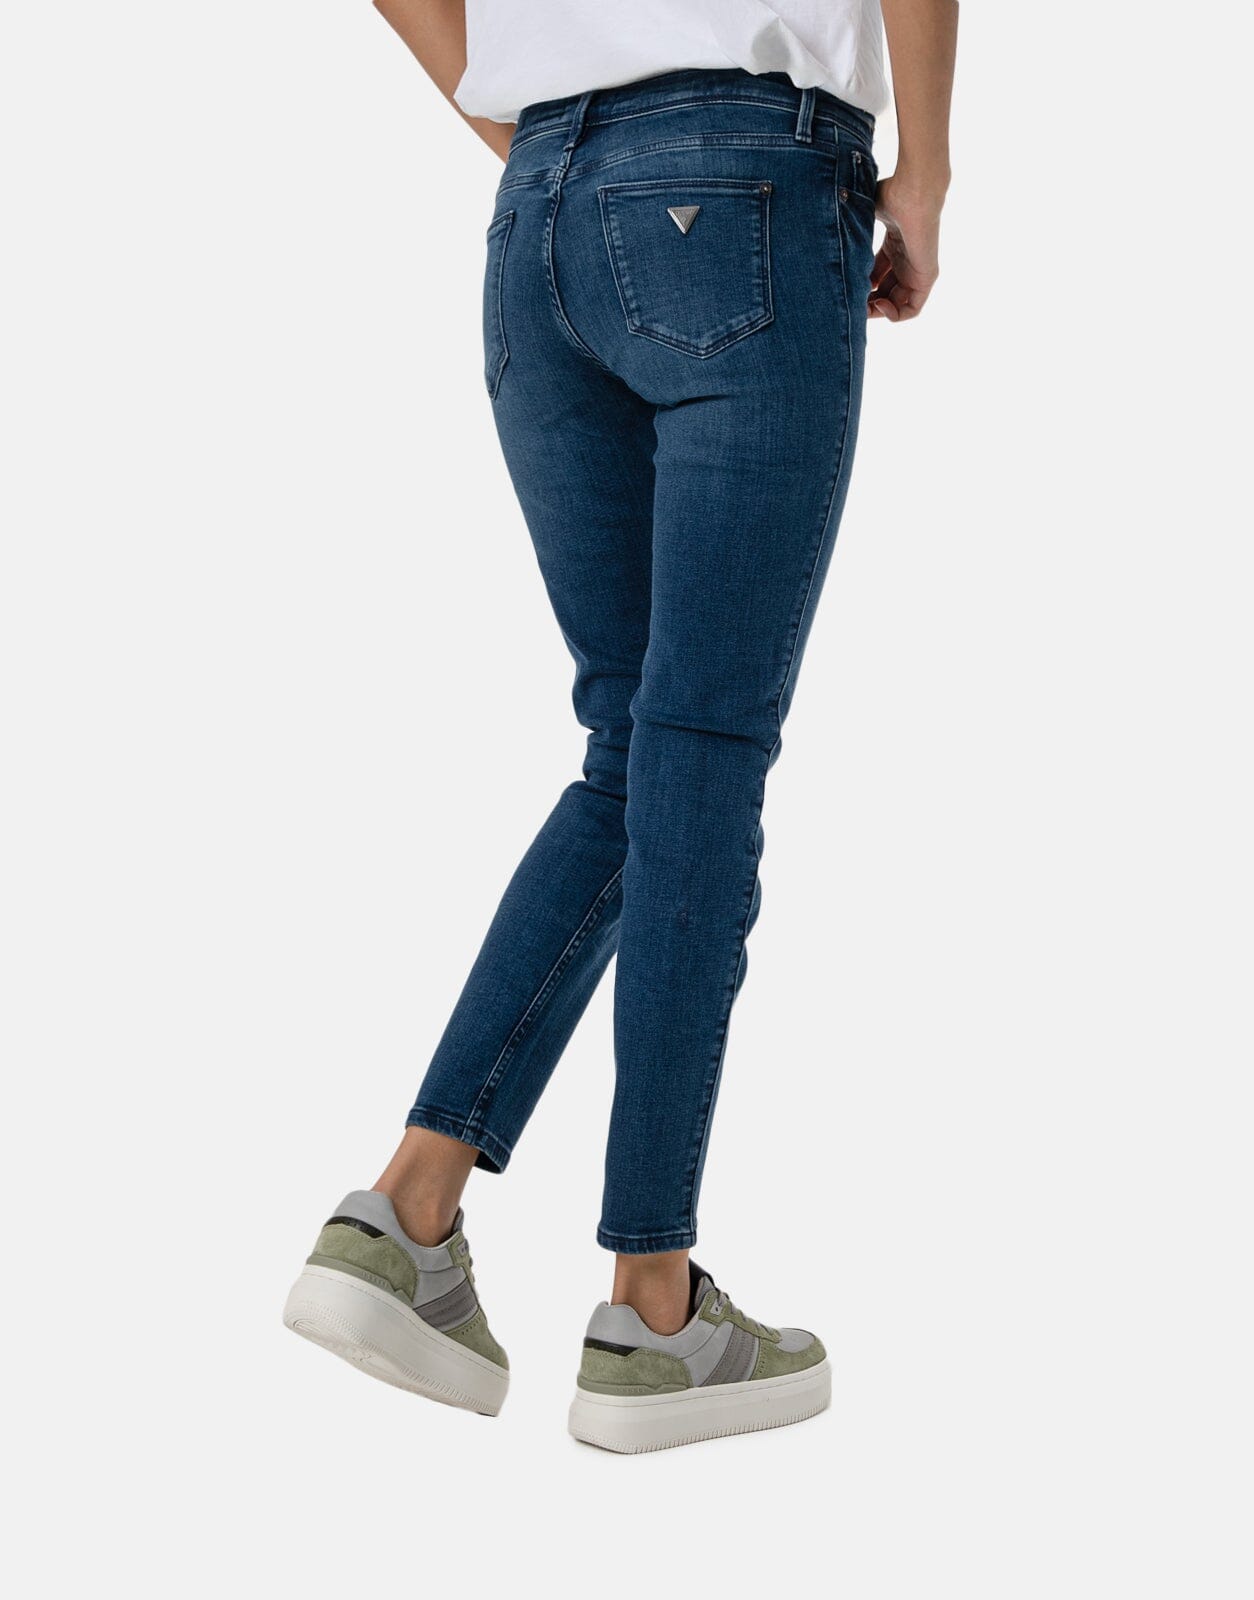 Guess Power Skinny Low Rise Jeans - Subwear